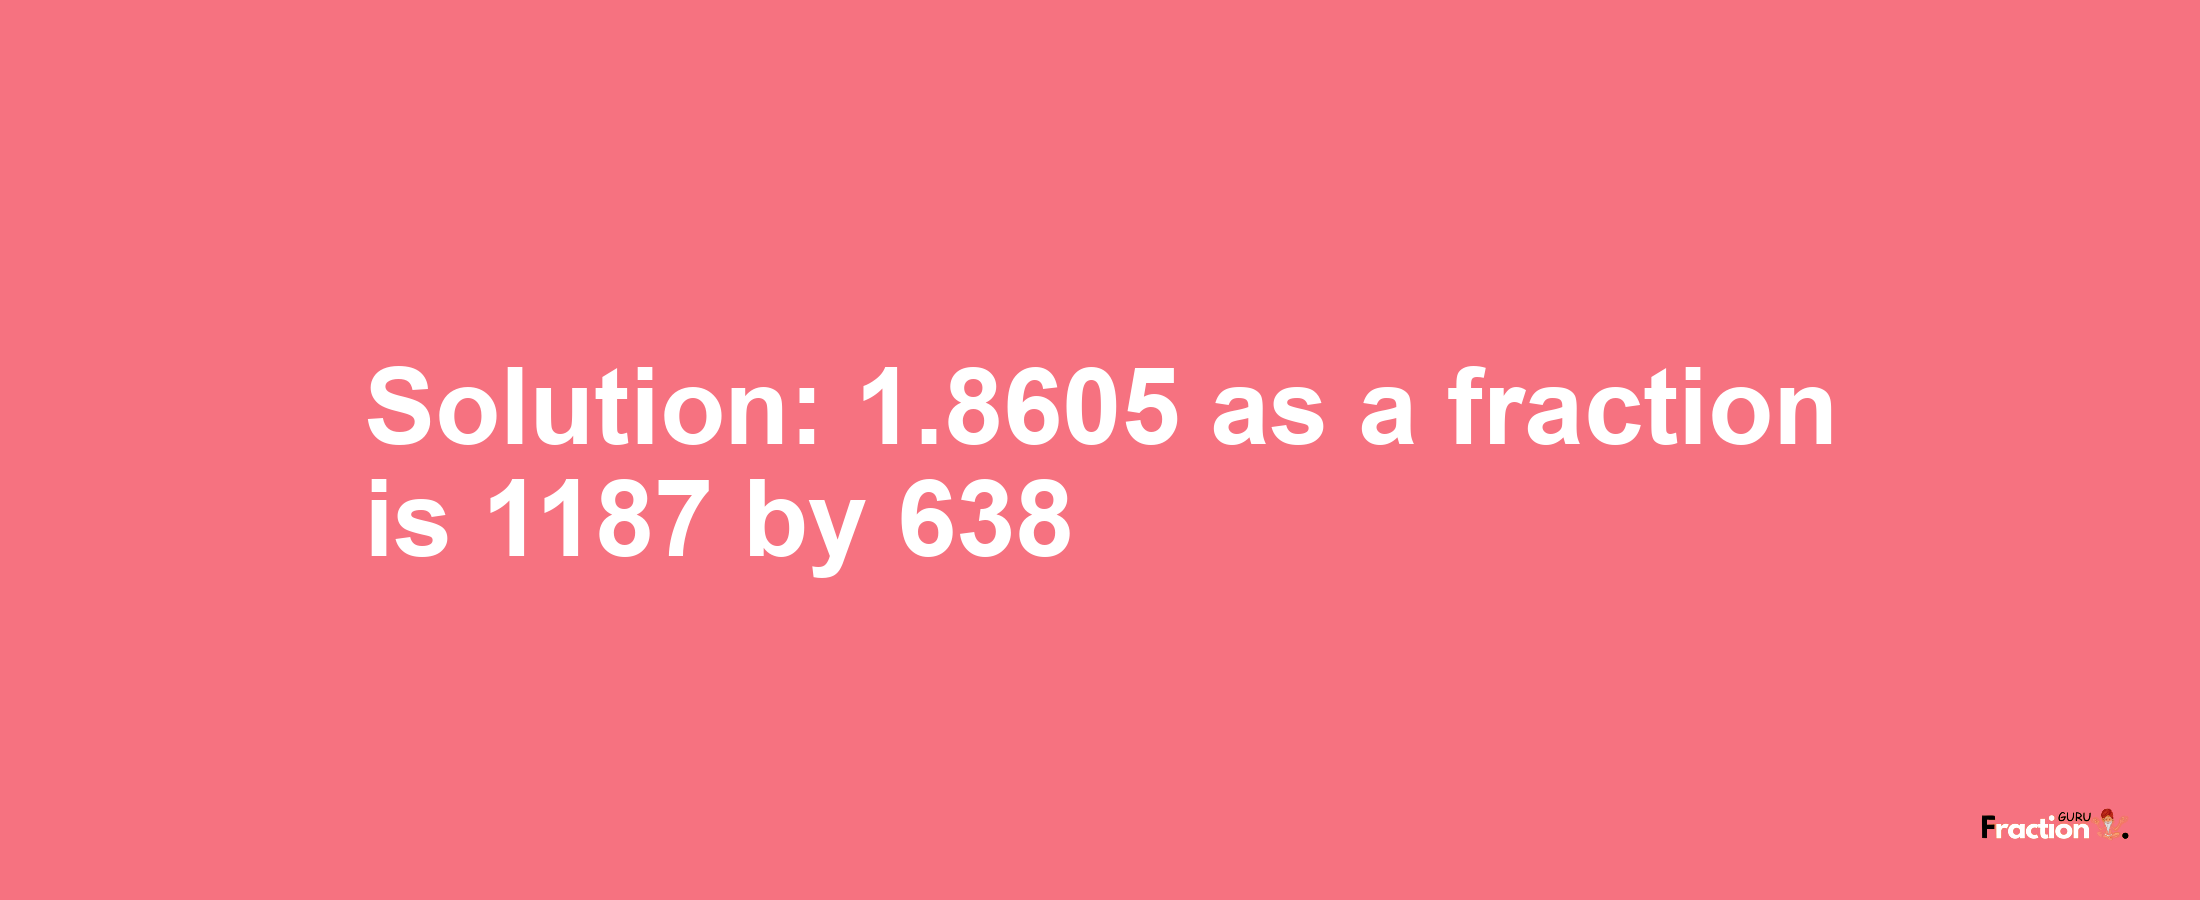 Solution:1.8605 as a fraction is 1187/638